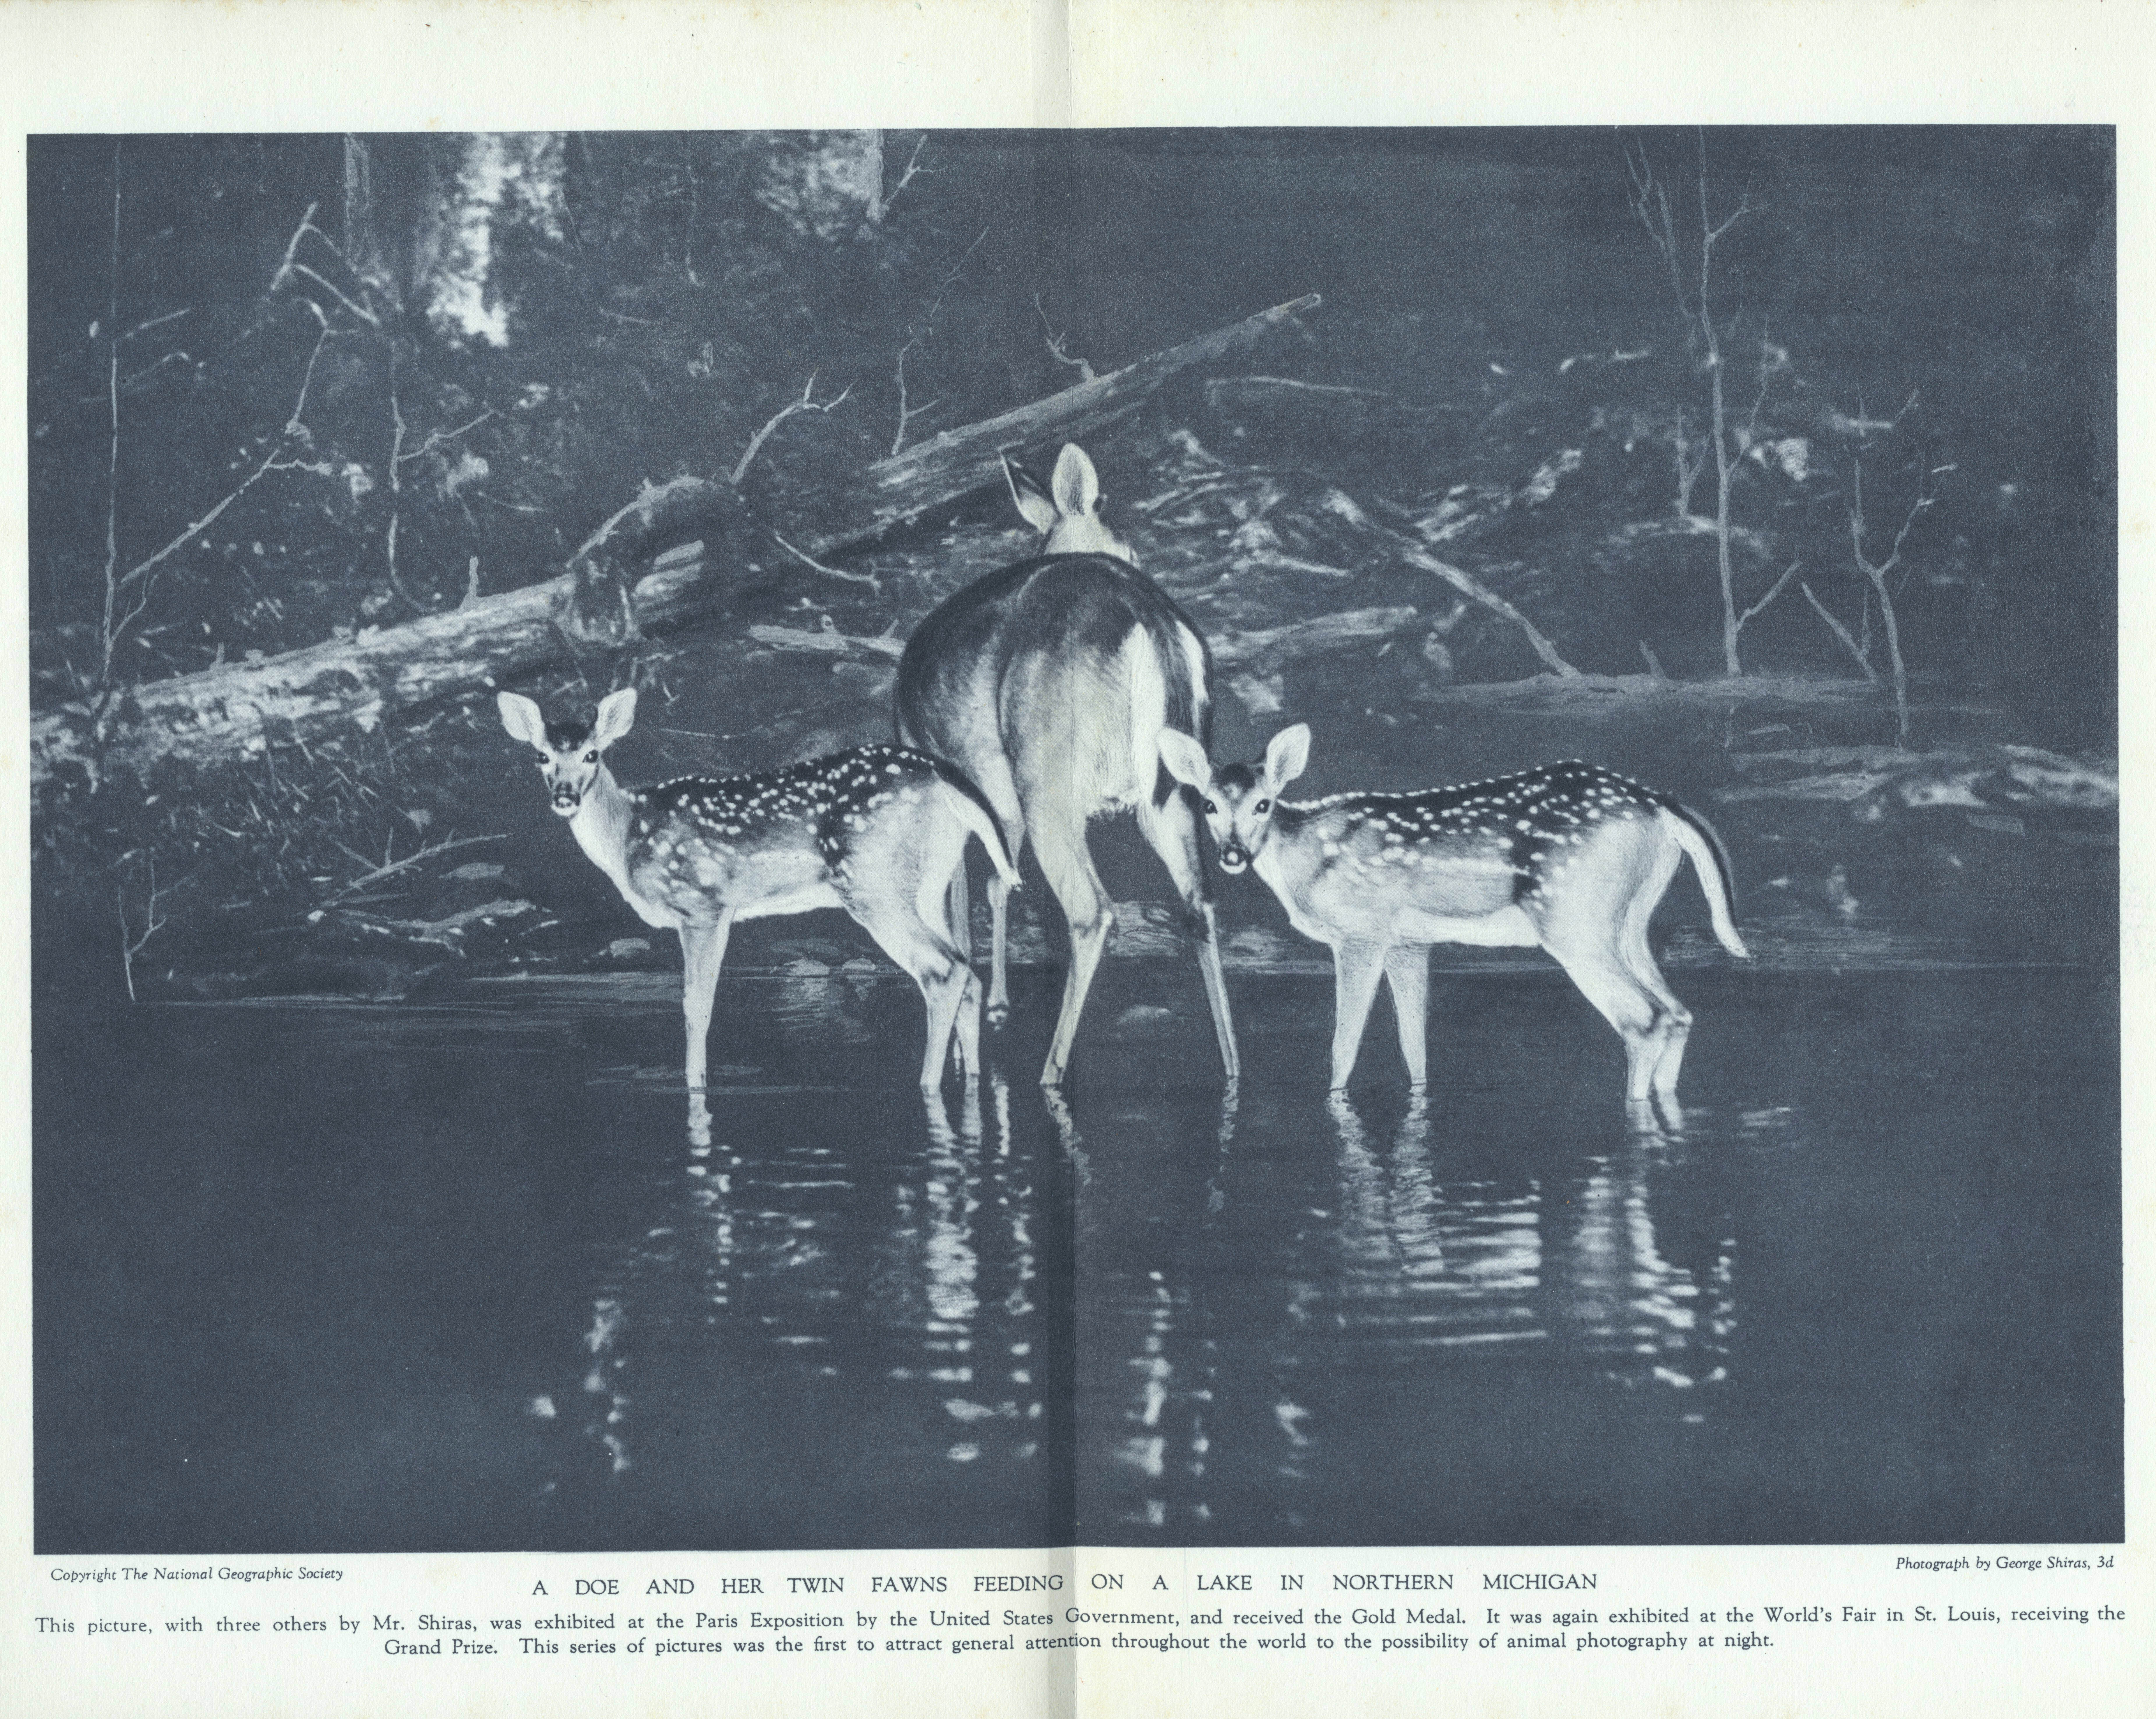 George Shiras (III) :: A doe and her twin fawns feeding on a lake in northern Michigan, published 1935